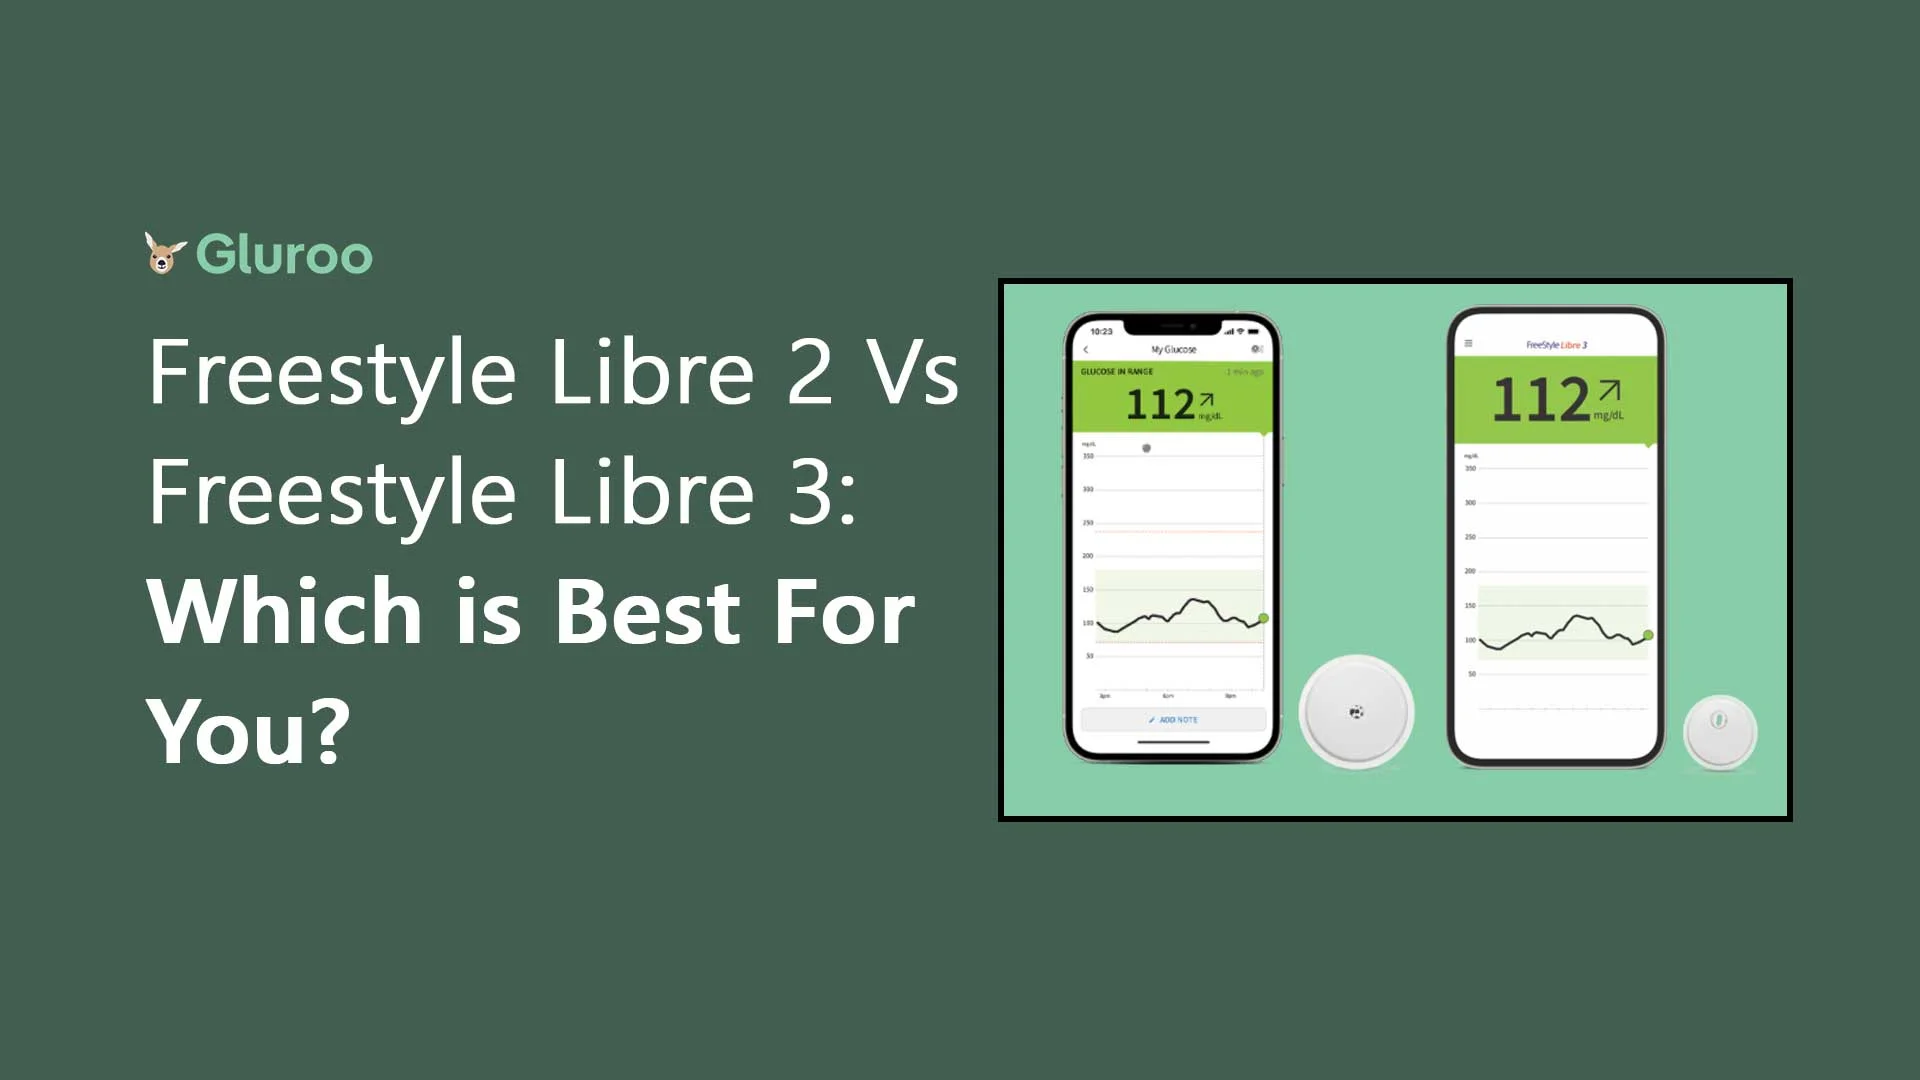 Freestyle Libre 2 Vs Freestyle Libre 3: Which is Best For You?